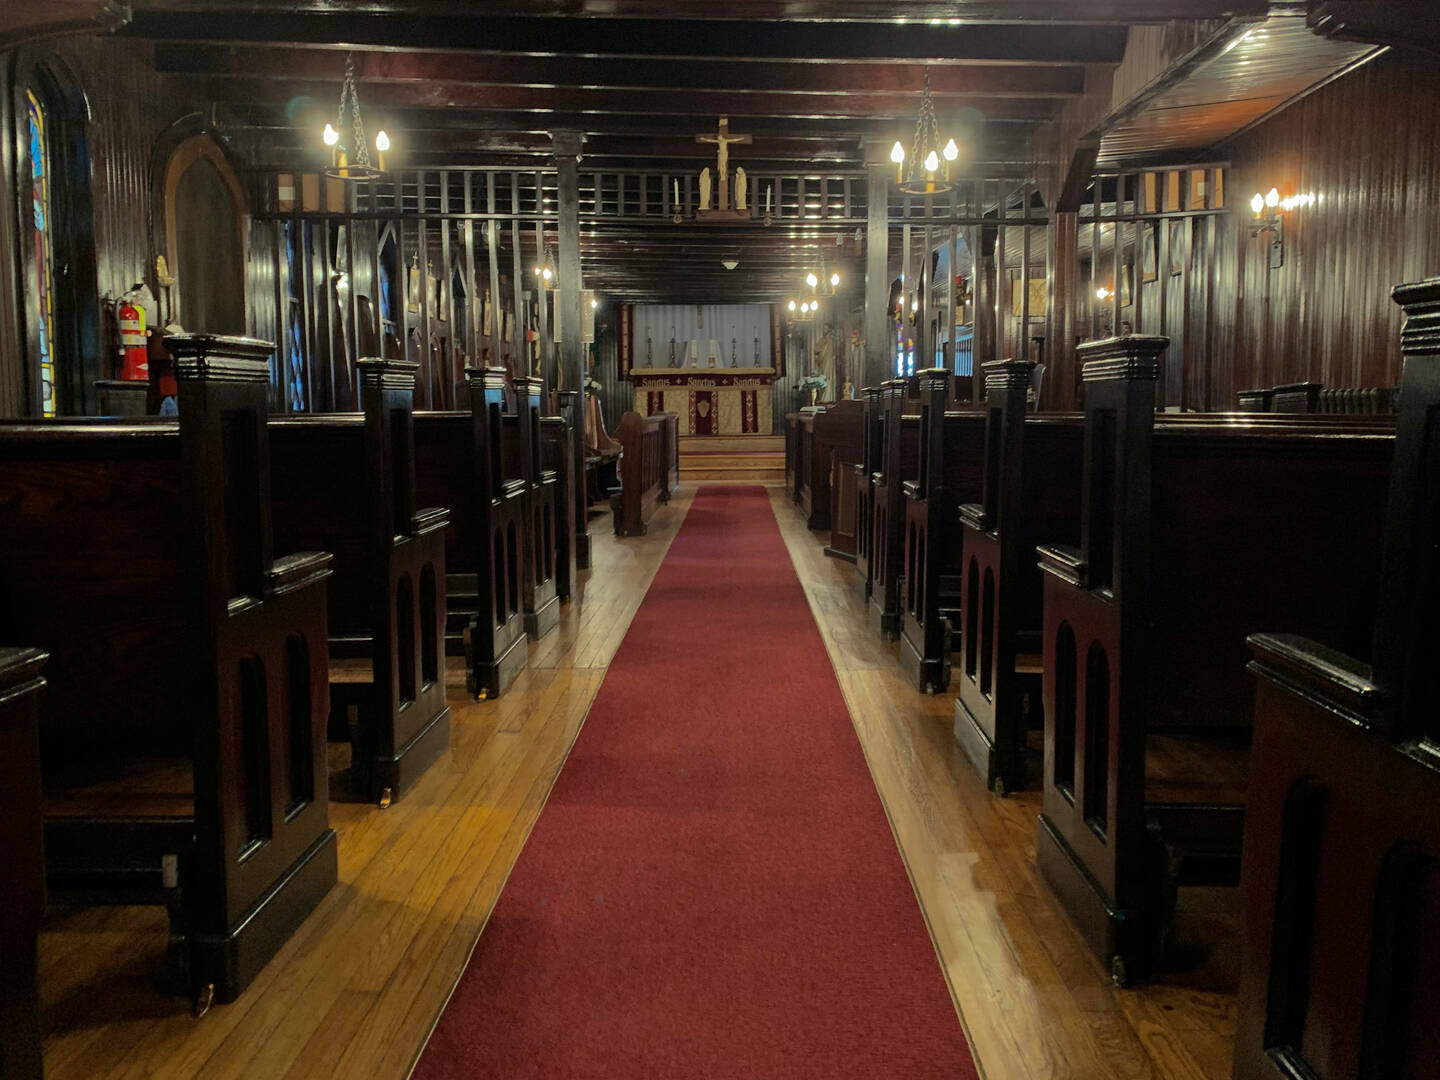 Our Lady of the Angels Chapel, with dark wooden pews and a red carpet leading to the altar